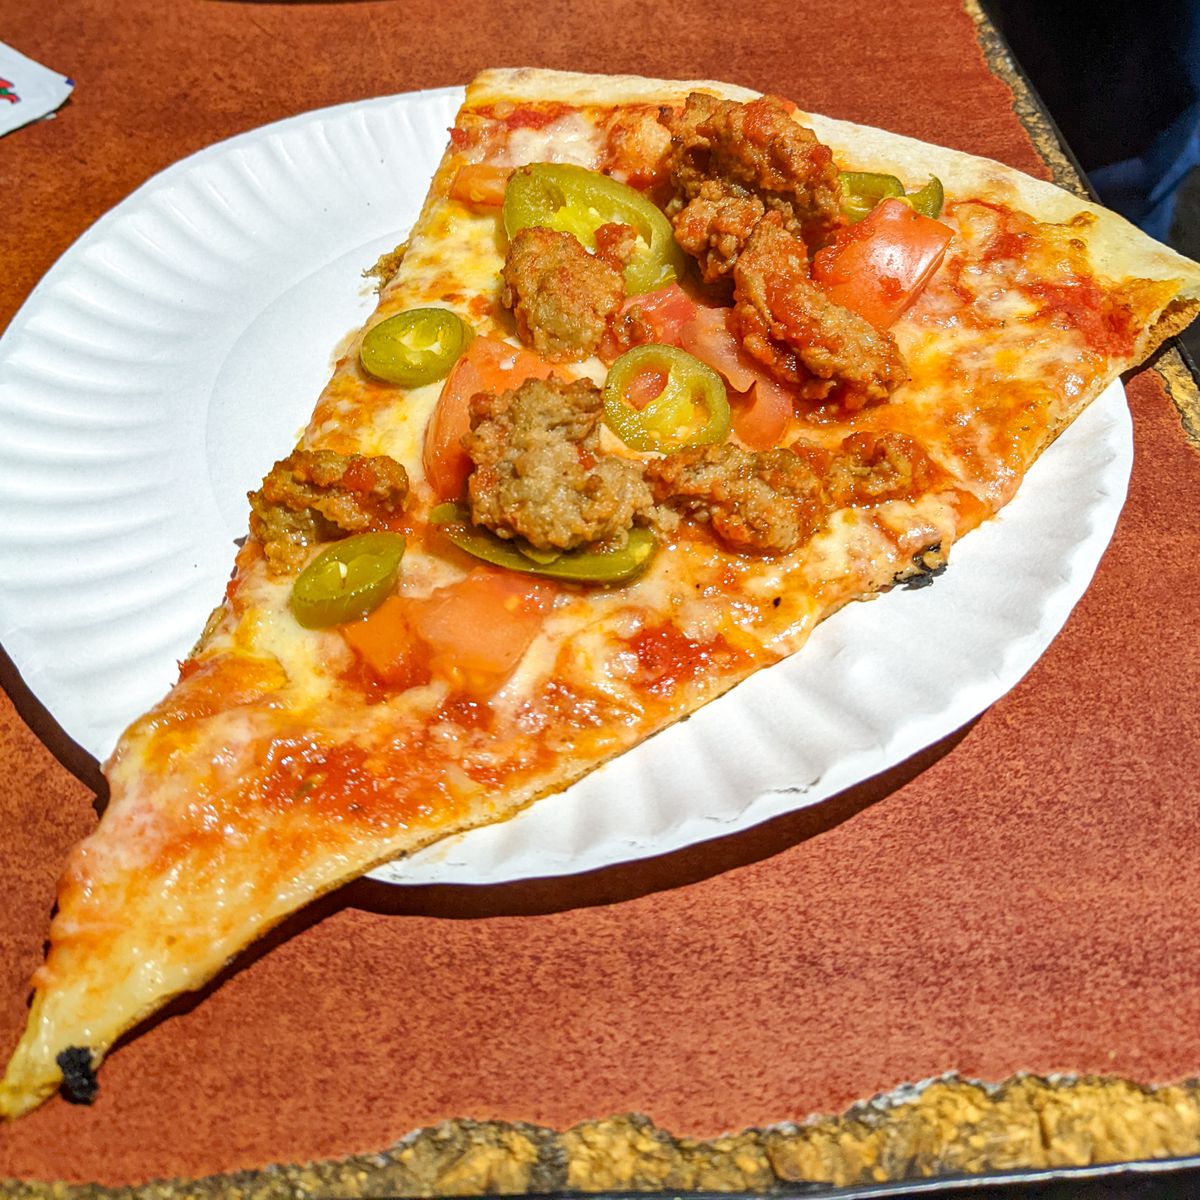 Slice of pizza with meatball, jalapenos and tomatoes with cheese and red sauce on a paper plate.